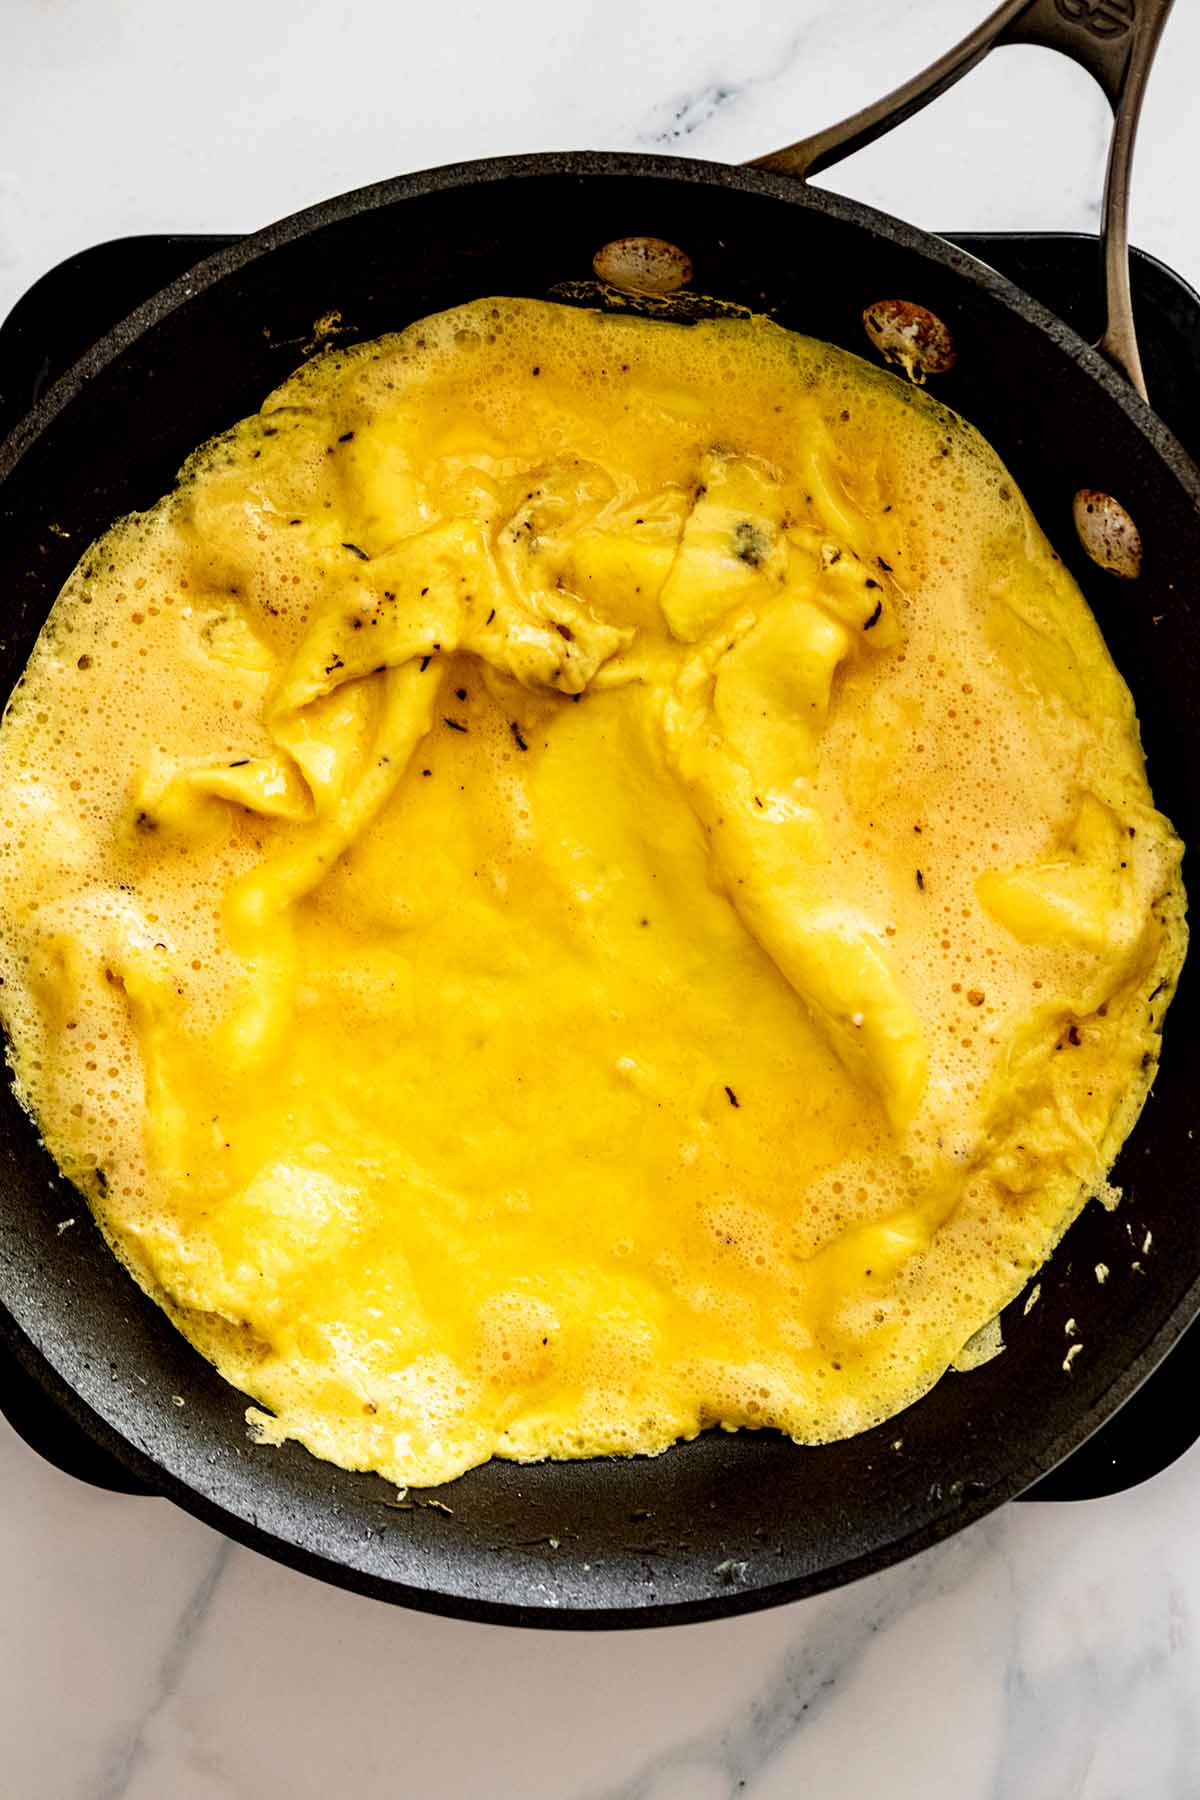 Semi-cooked omelette in a skillet